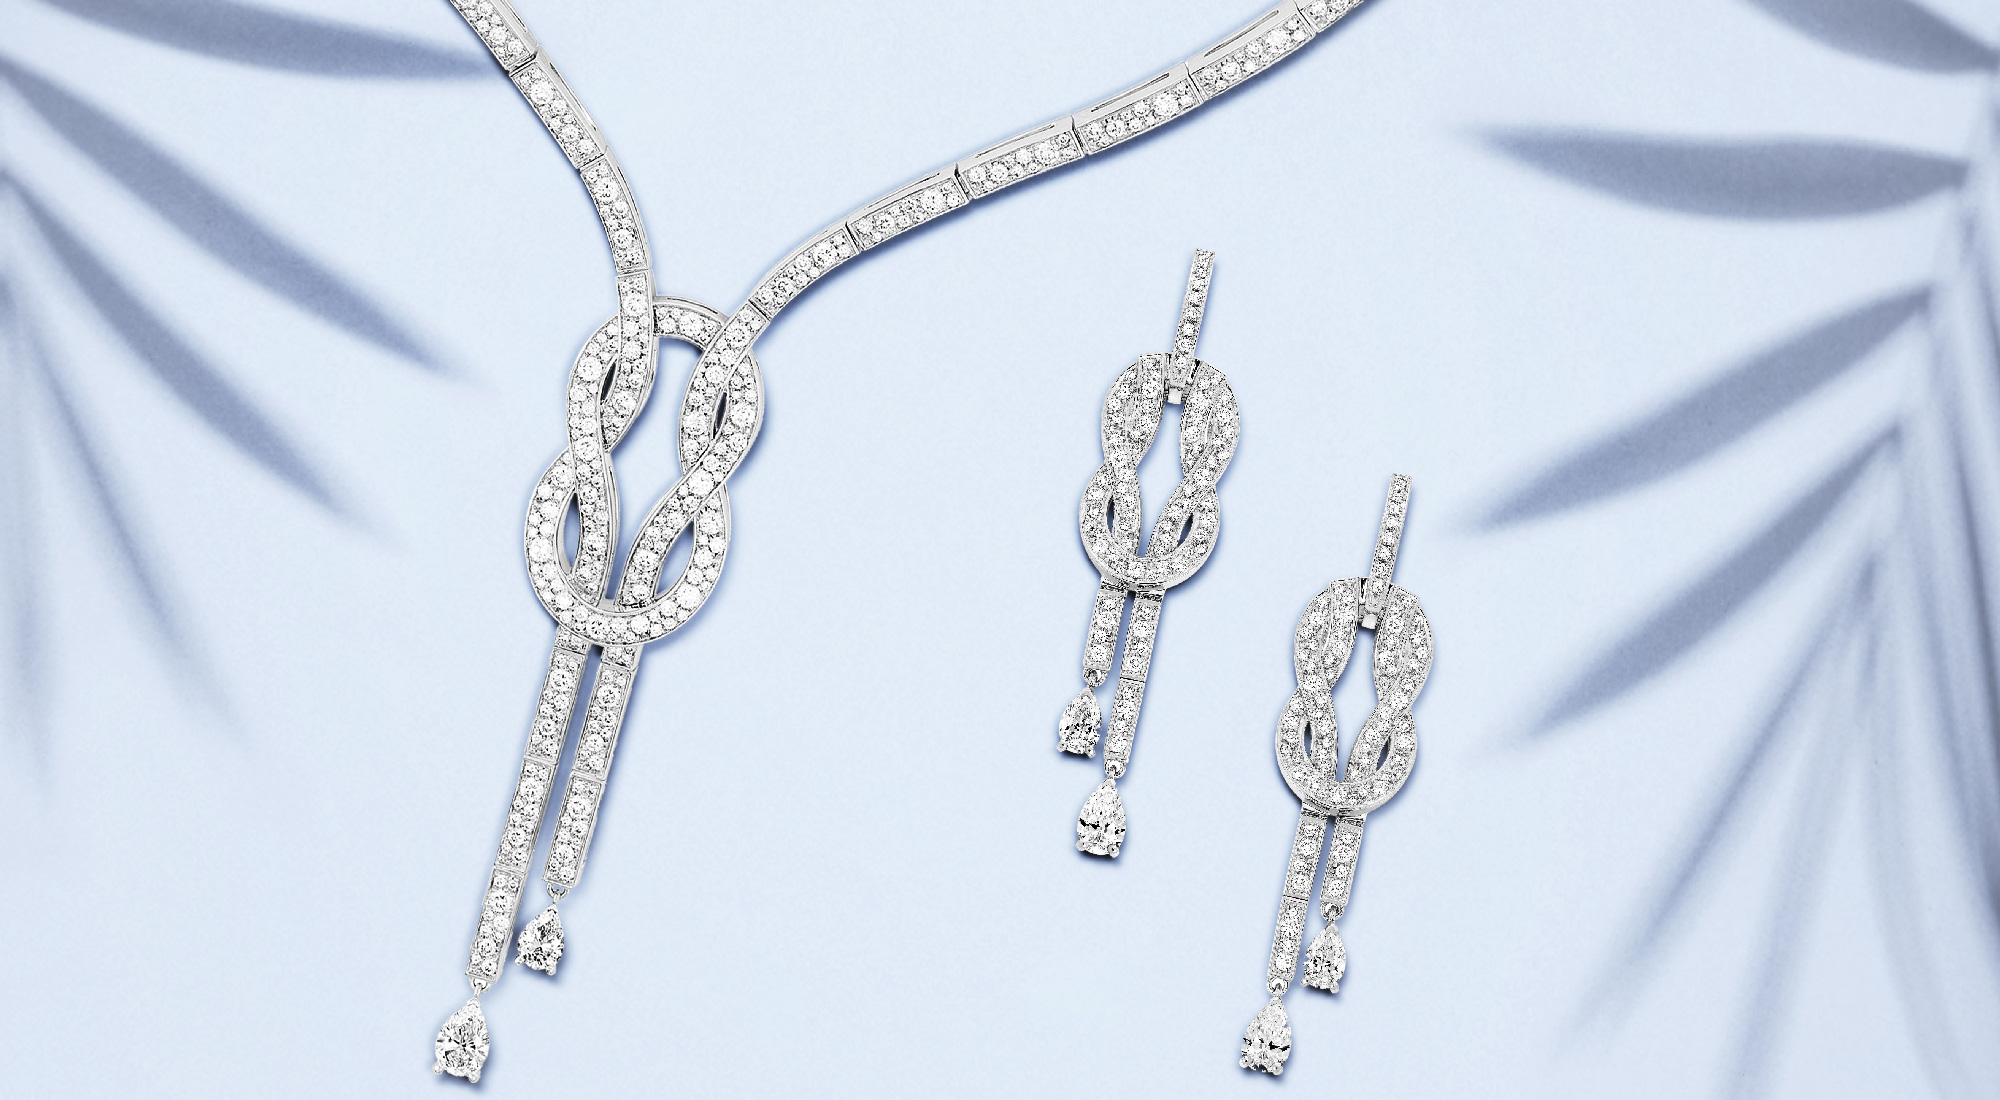 Fred Launches High Jewelry Set Featuring Blue Lab-grown Diamonds – WWD